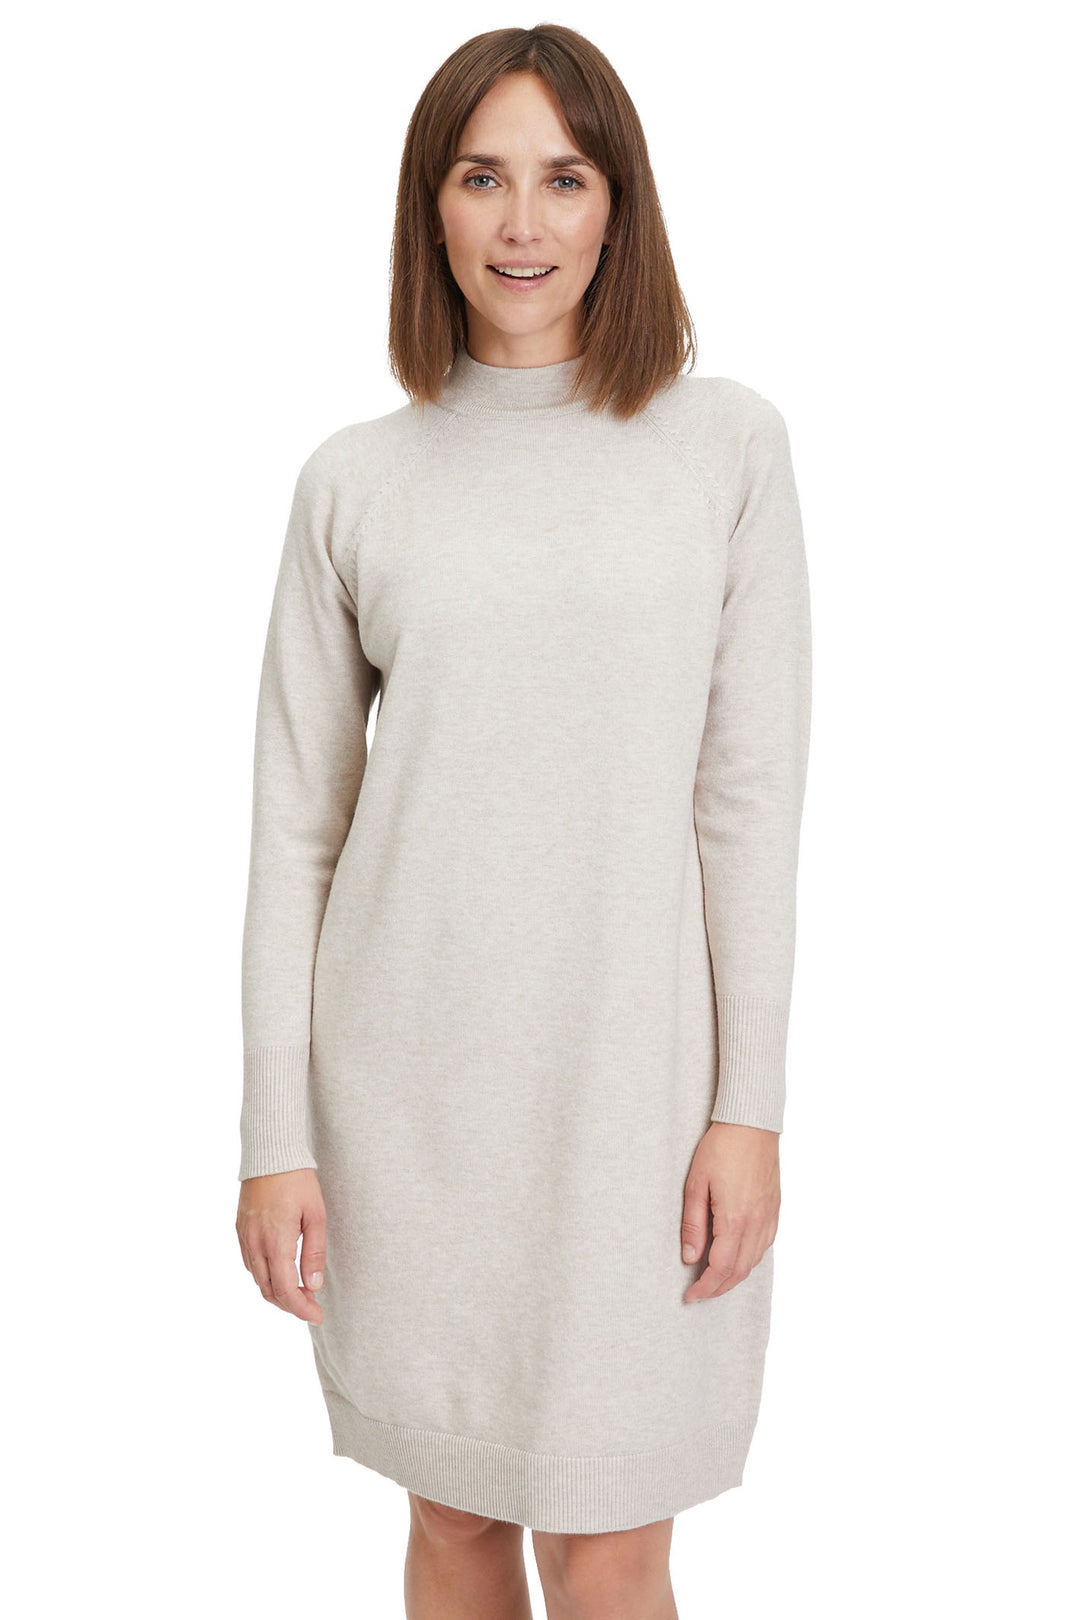 Betty Barclay 50151026 7706 Beige Knitted Dress With Sleeves - Dotique Chesterfield